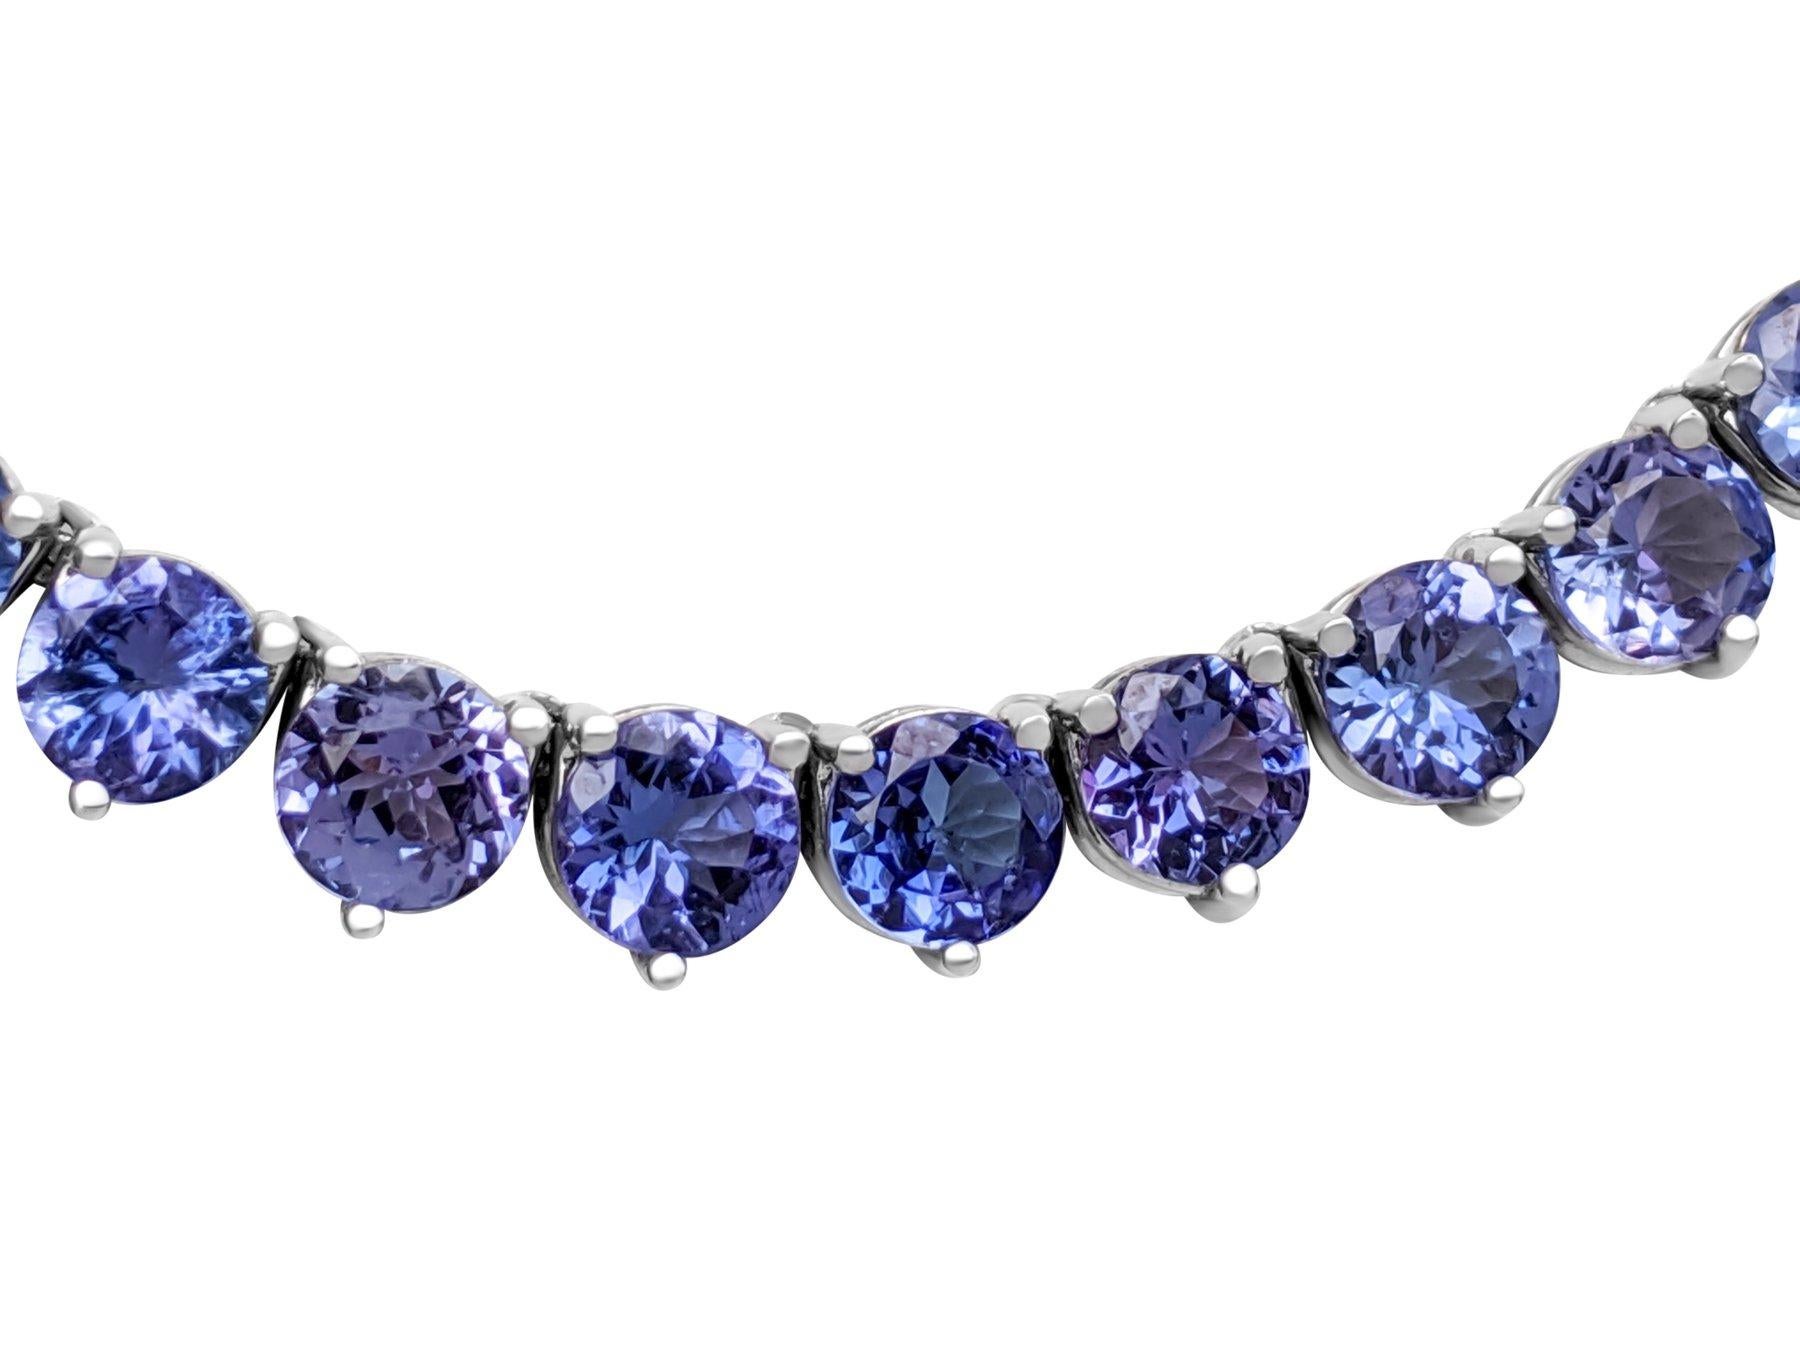 Center Tanzanite Stones:
Weight: 38.10 ct / 78 pieces
Color: Violetish Blue
Shape: Round Mixed
Tanzanites are usually enhances by heat

Item ships from Israeli Diamonds Exchange, customers are responsible for any local customs or VAT fees that might